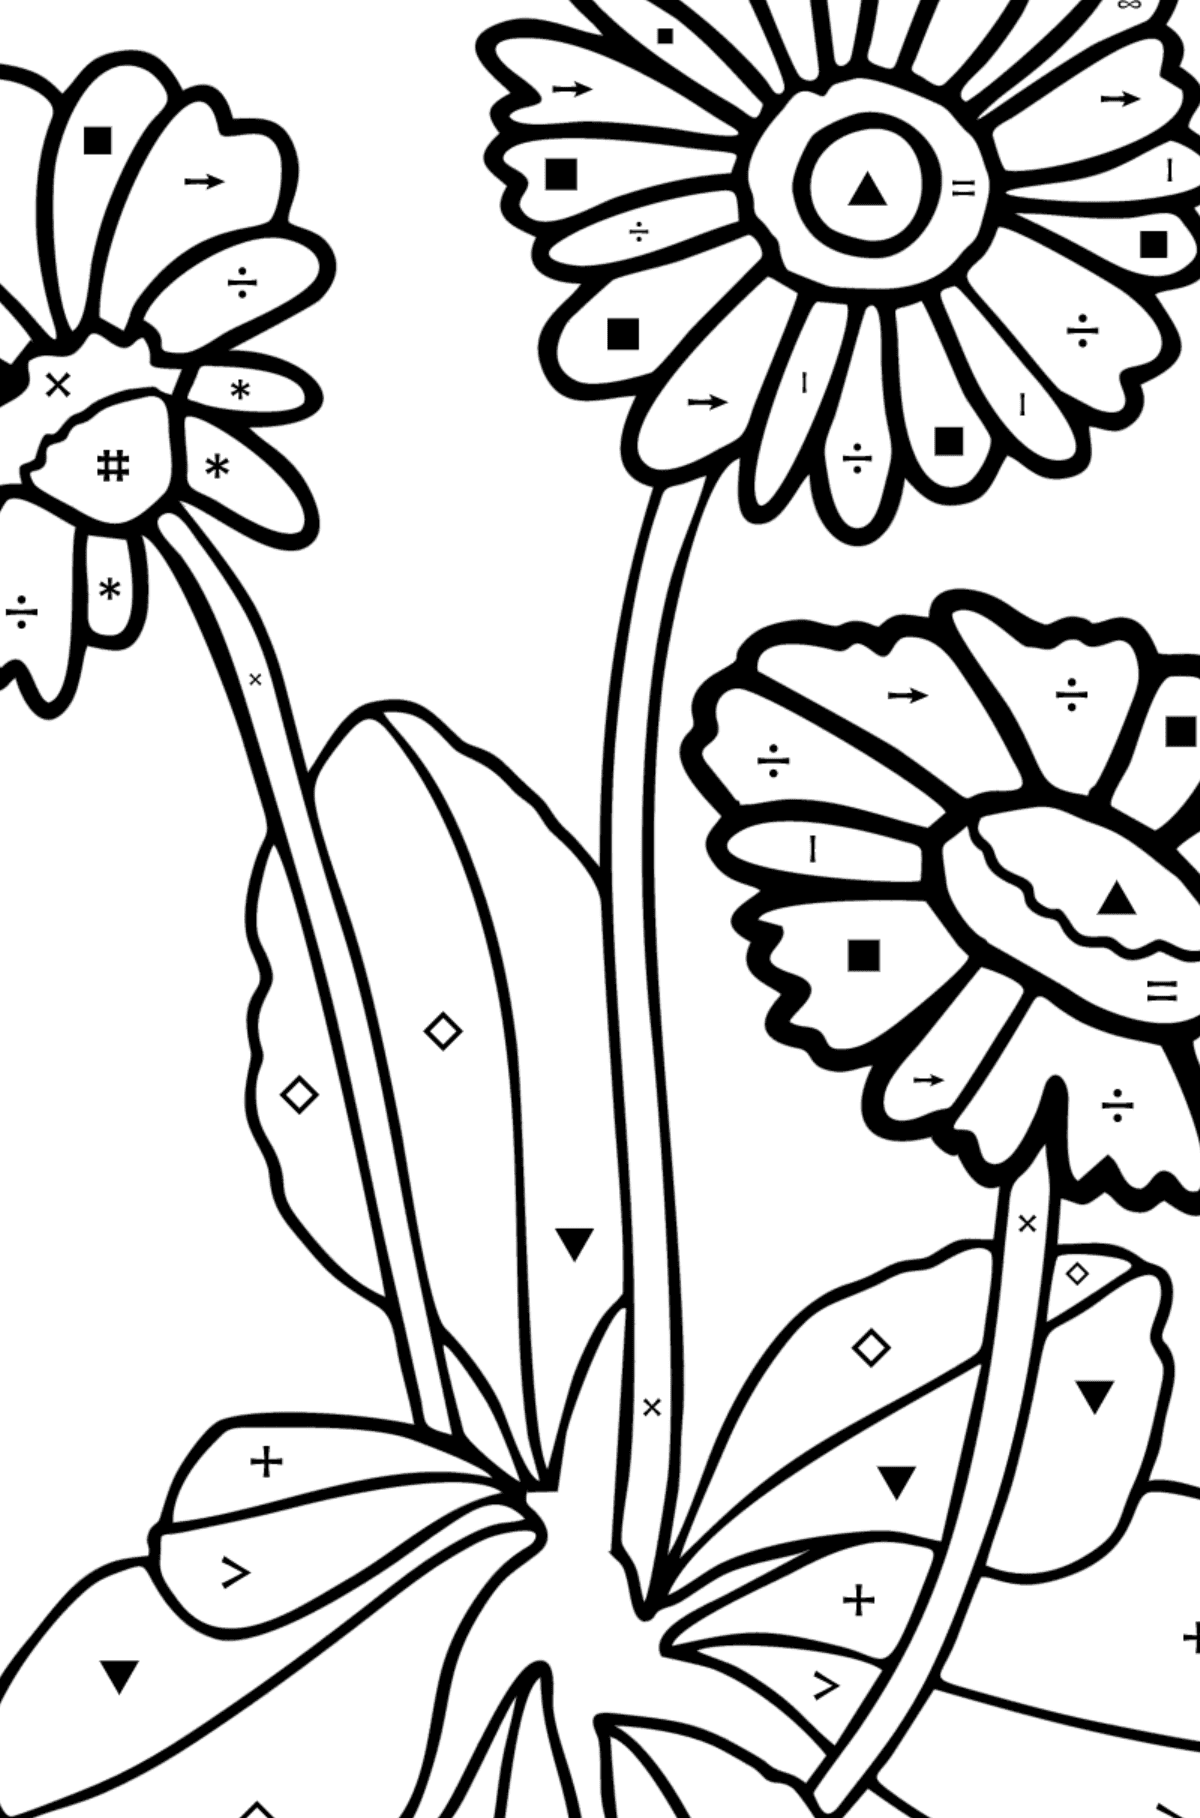 Daisy coloring page - Coloring by Symbols for Kids